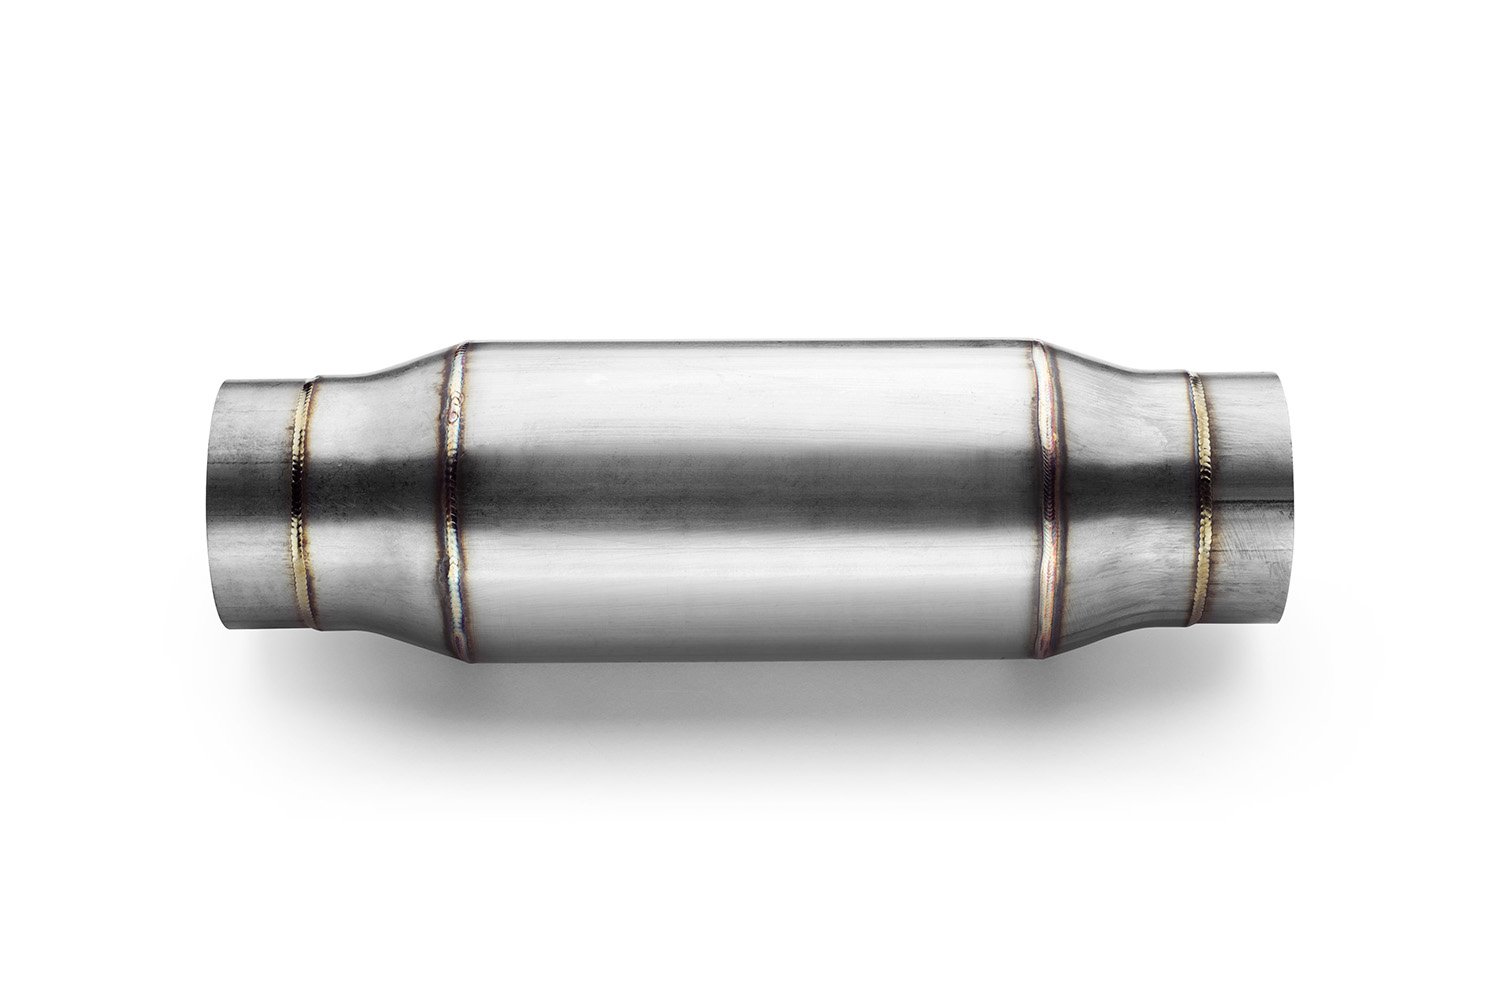 TR-Series Resonator Muffler, Inlet/Outlet: 3 in., Overall Length: 13 in. [Mirror Polished Finish]